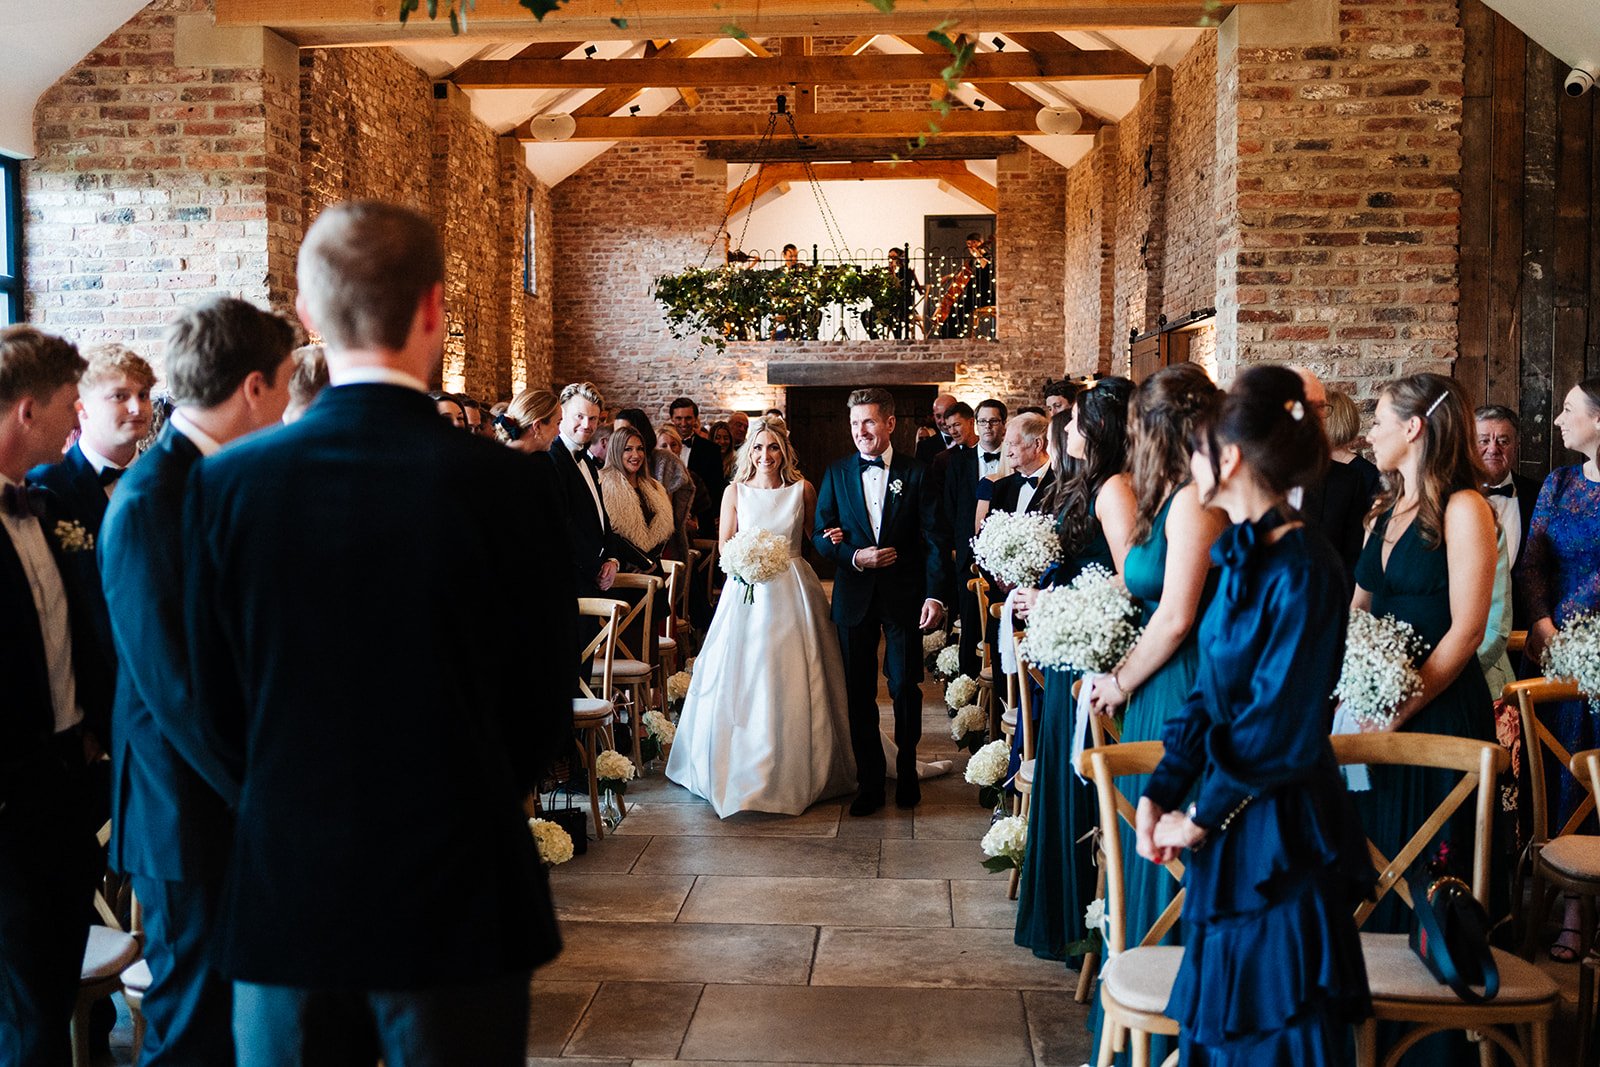 The bride and her father walk down the aisle in a barn ceremony room in North Yorkshire